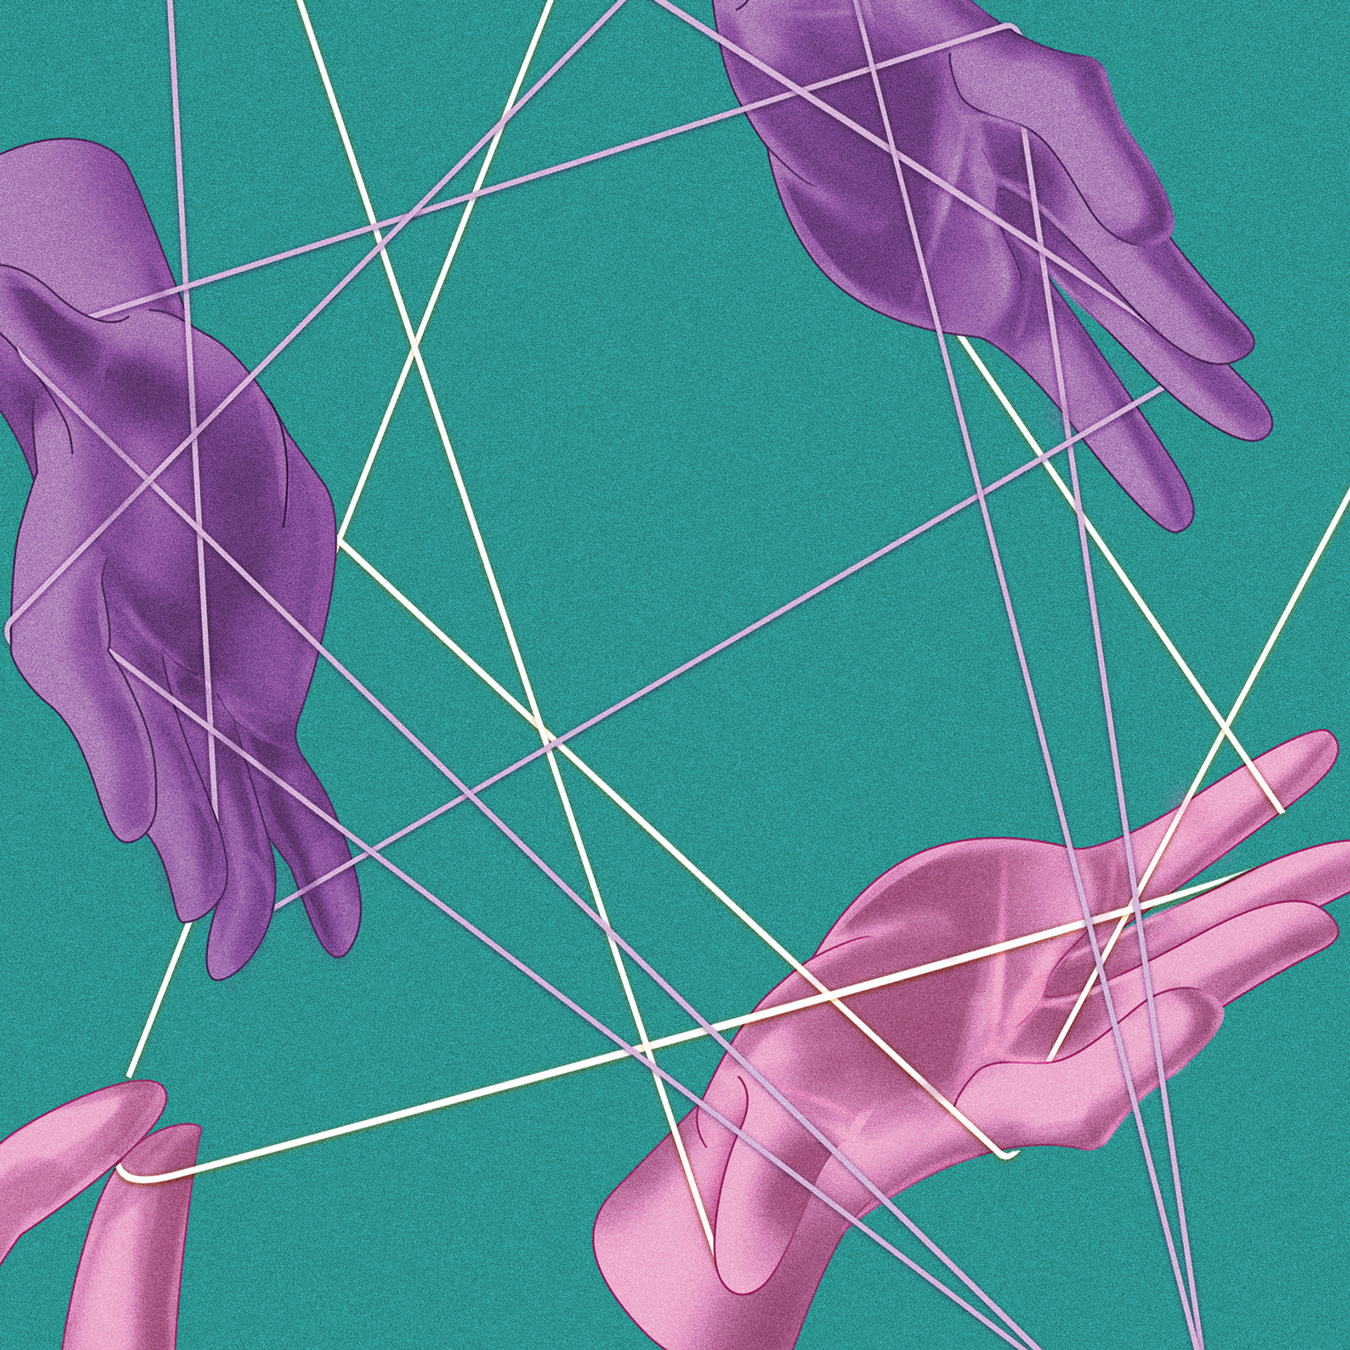 An illustration of disembodied pink and purple hands plucking and stretching crisscrossing white and purple strings across a teal backdrop.